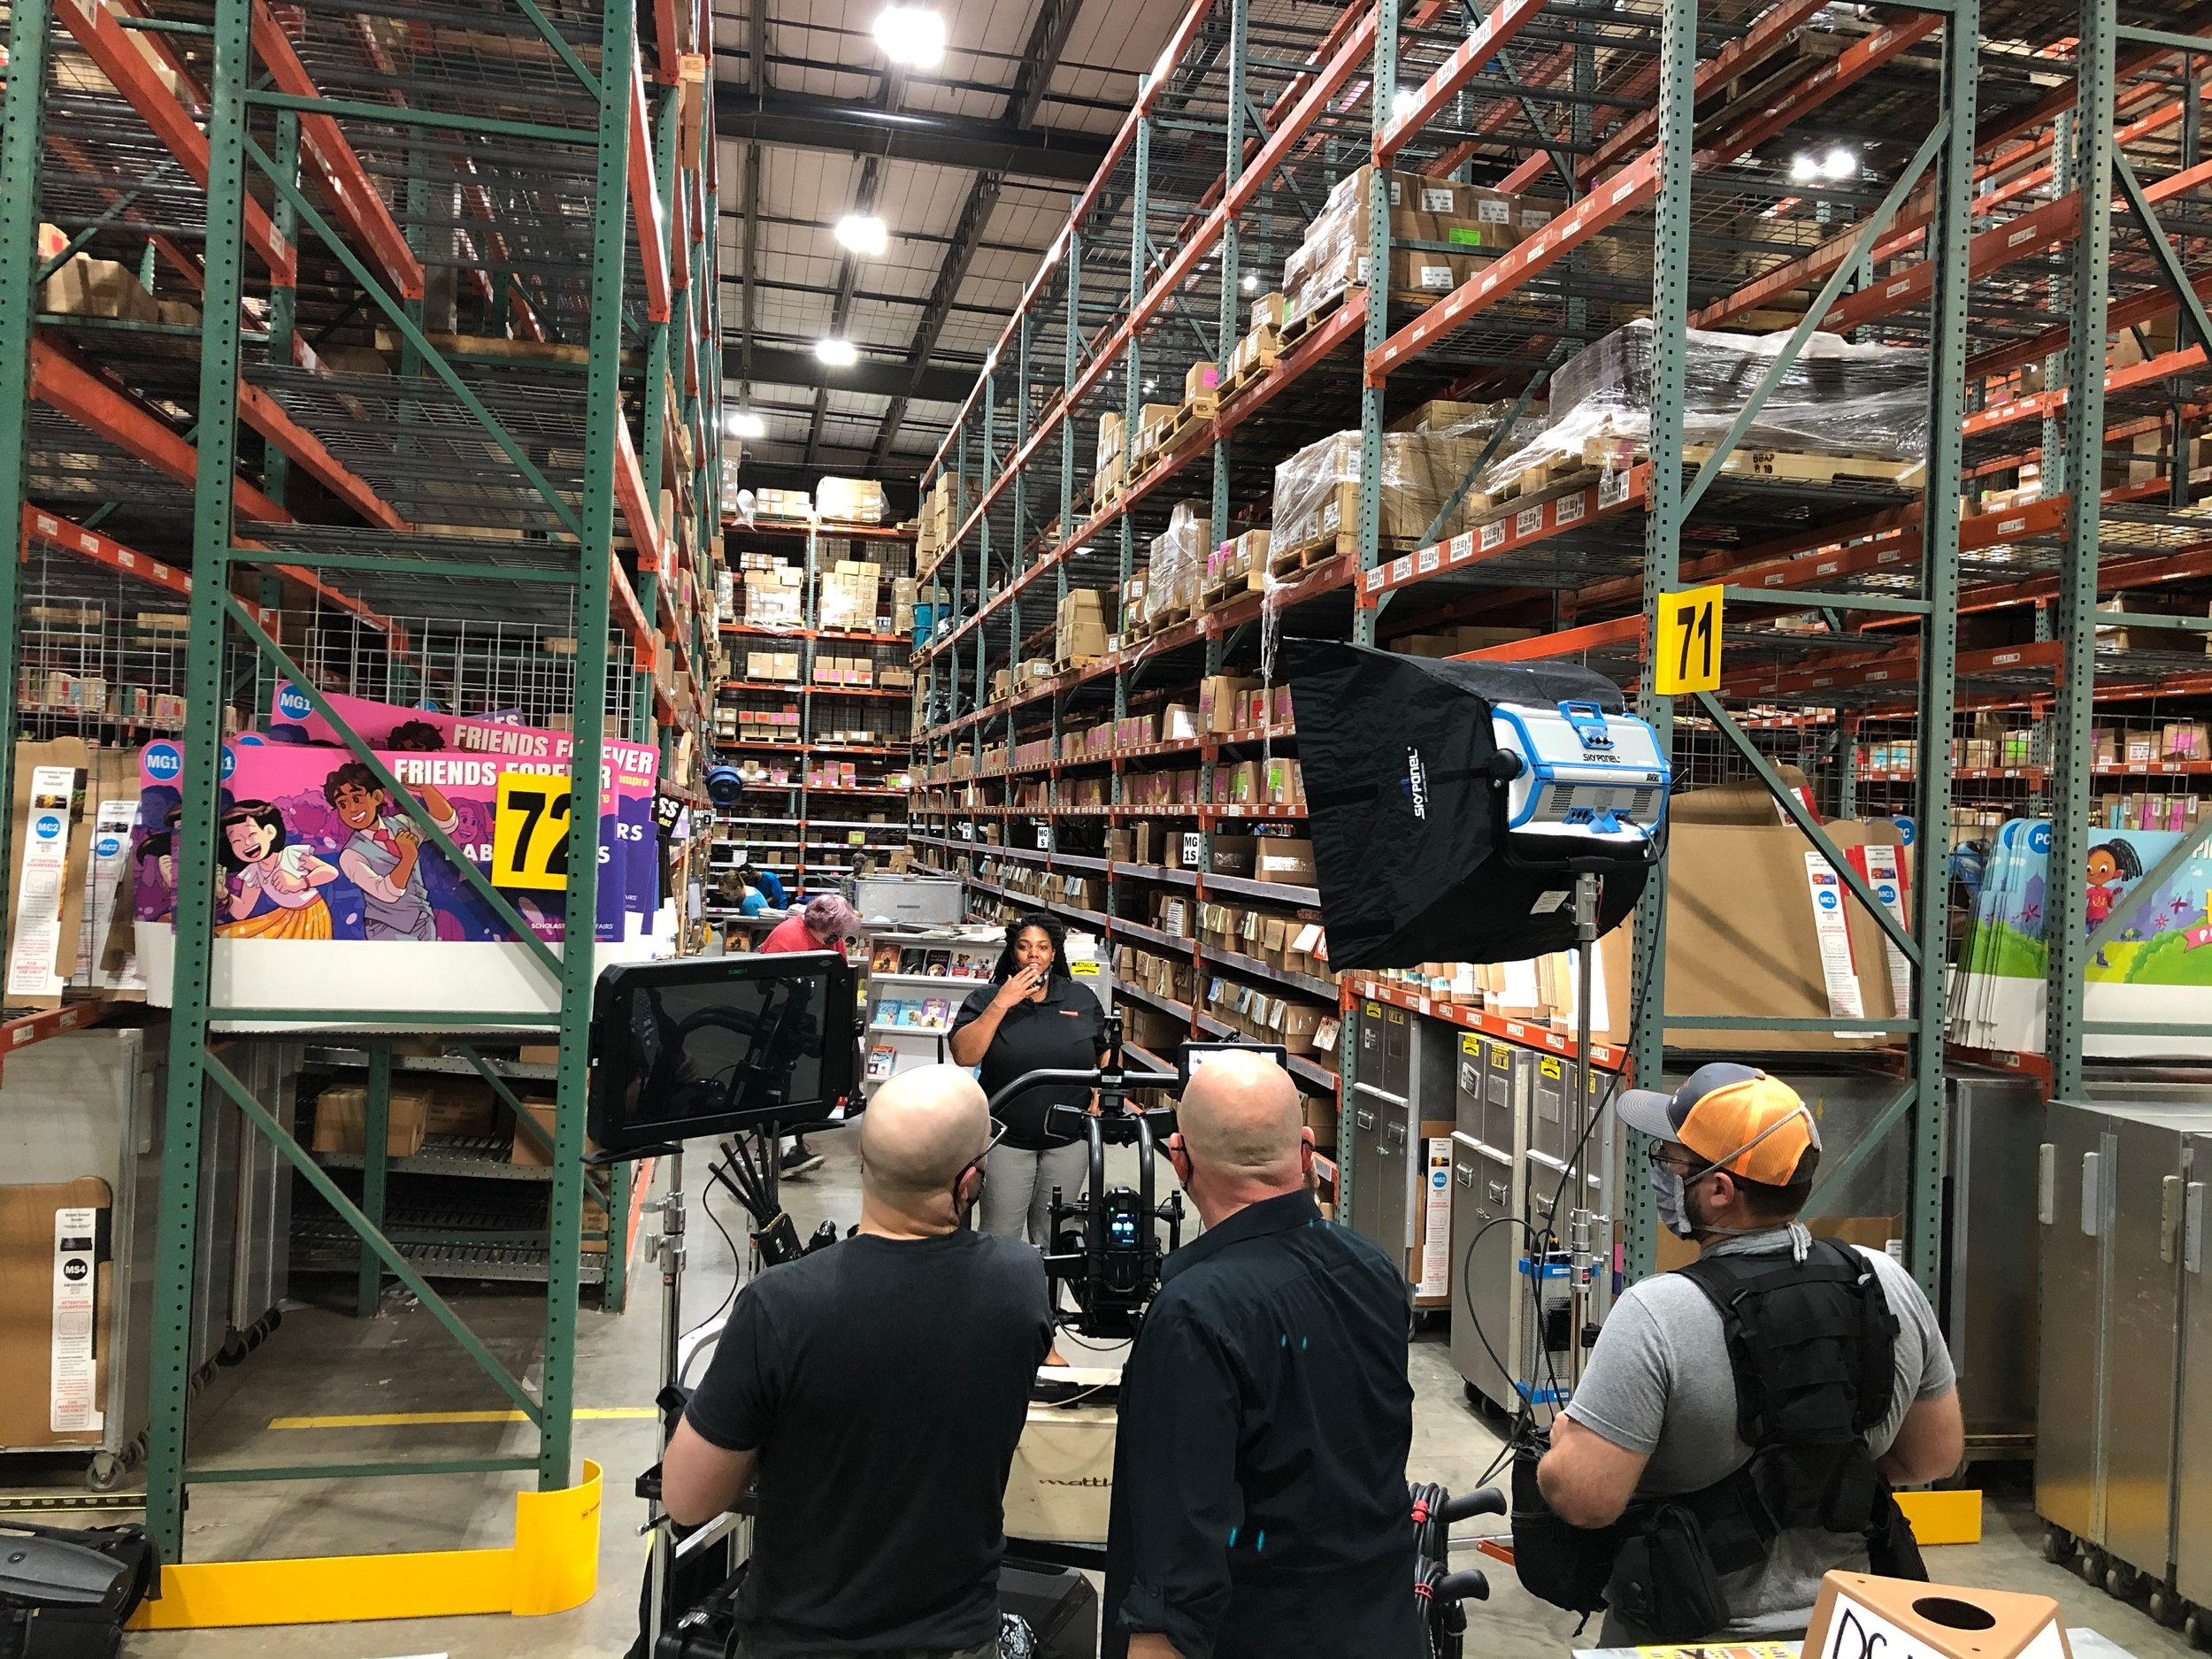  Cameras and lights set up for video production in a warehouse 